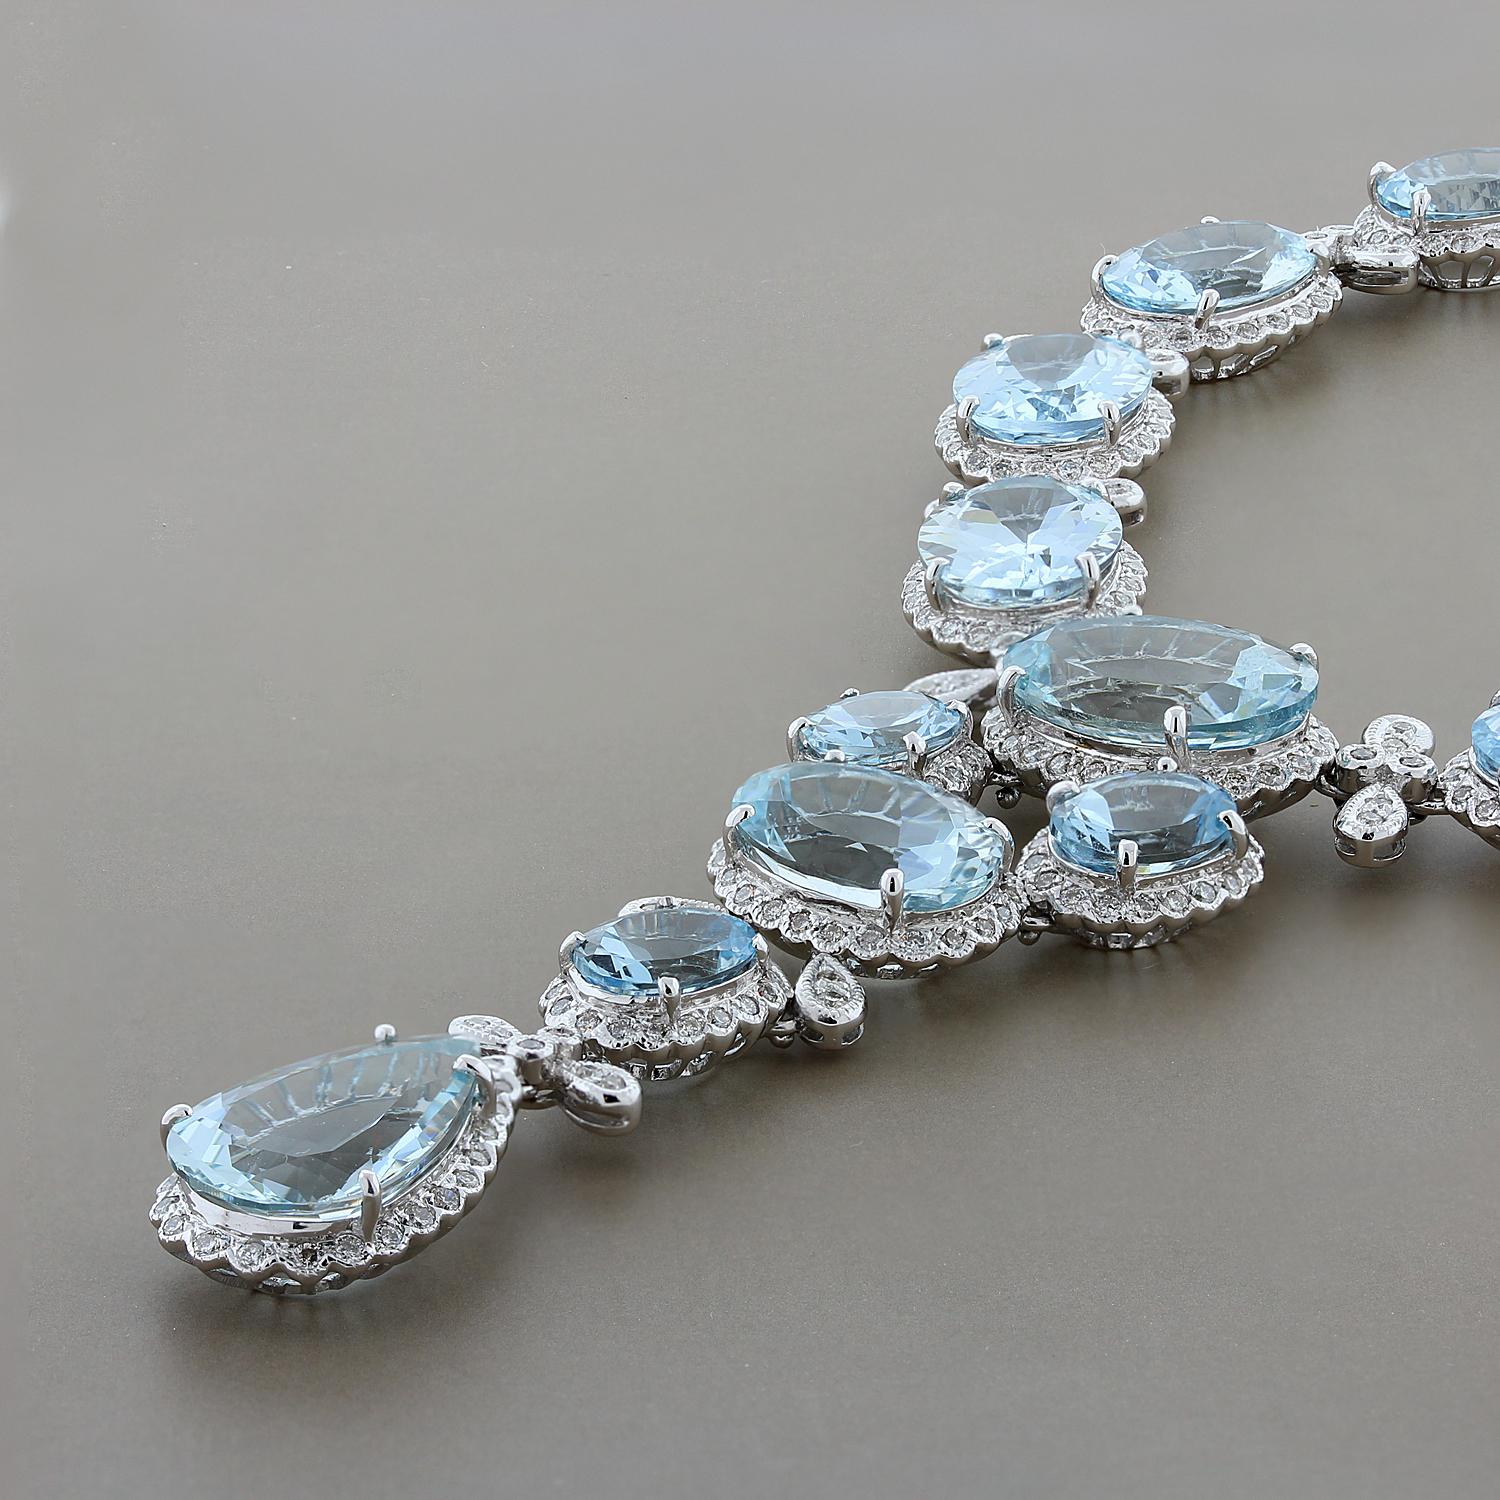 A dazzling necklace featuring 26 graduating oval cut aquamarines with 1 pear cut aquamarine culminating the elegant drop of this exceptional necklace. Each sea blue aquamarine is haloed and accentuated by a total of 5.66 carats of round cut